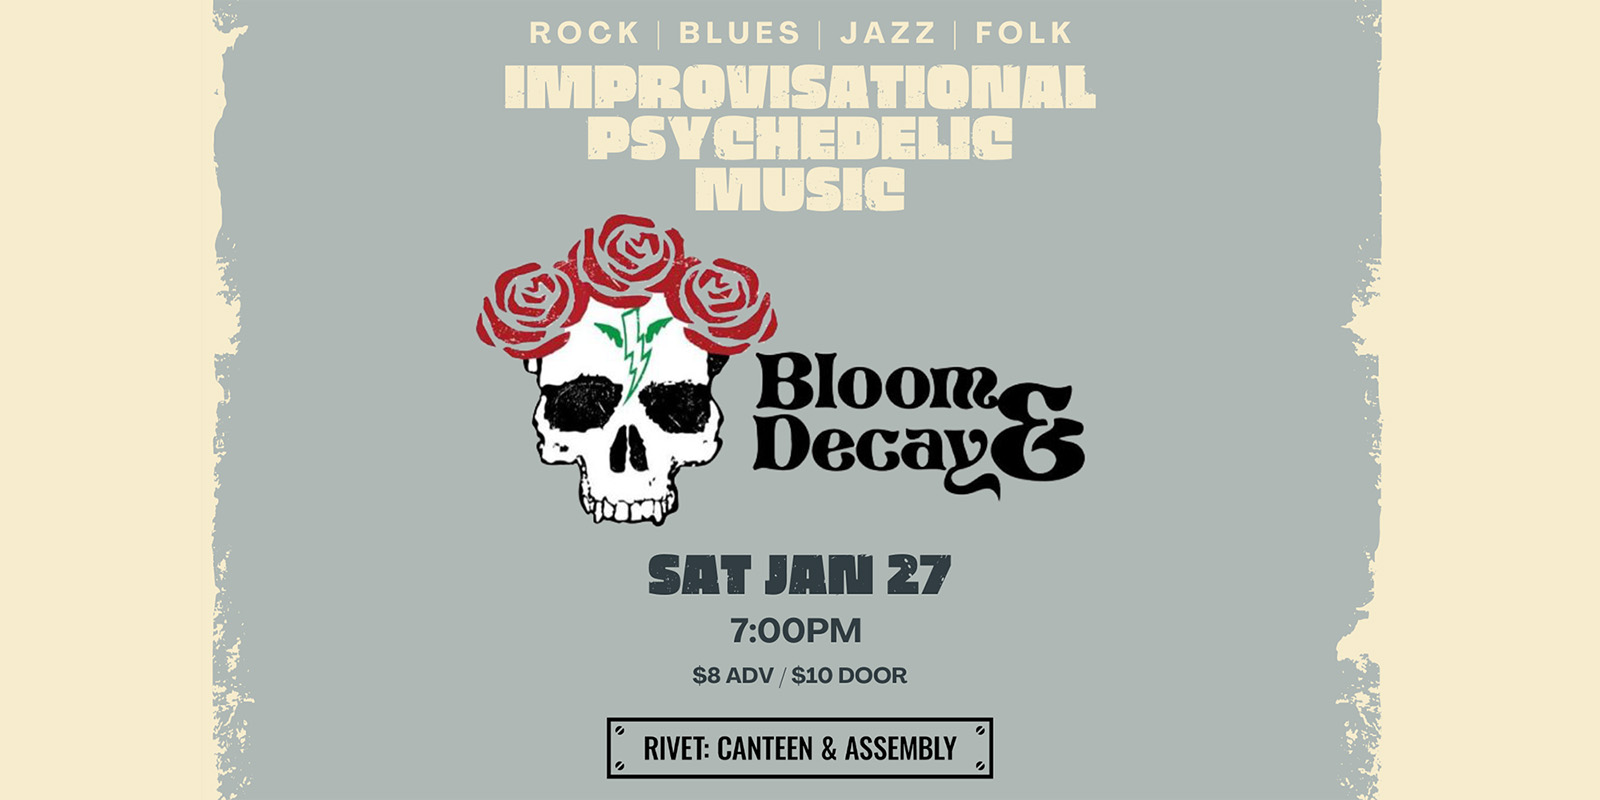 Bloom & Decay returns to Rivet: Canteen & Assembly on Saturday, January 27, 2024. Their improvisational live performances perfectly blend rock, blues, jazz, and folk music with their iconic psychedelic sound. All ages are welcome!